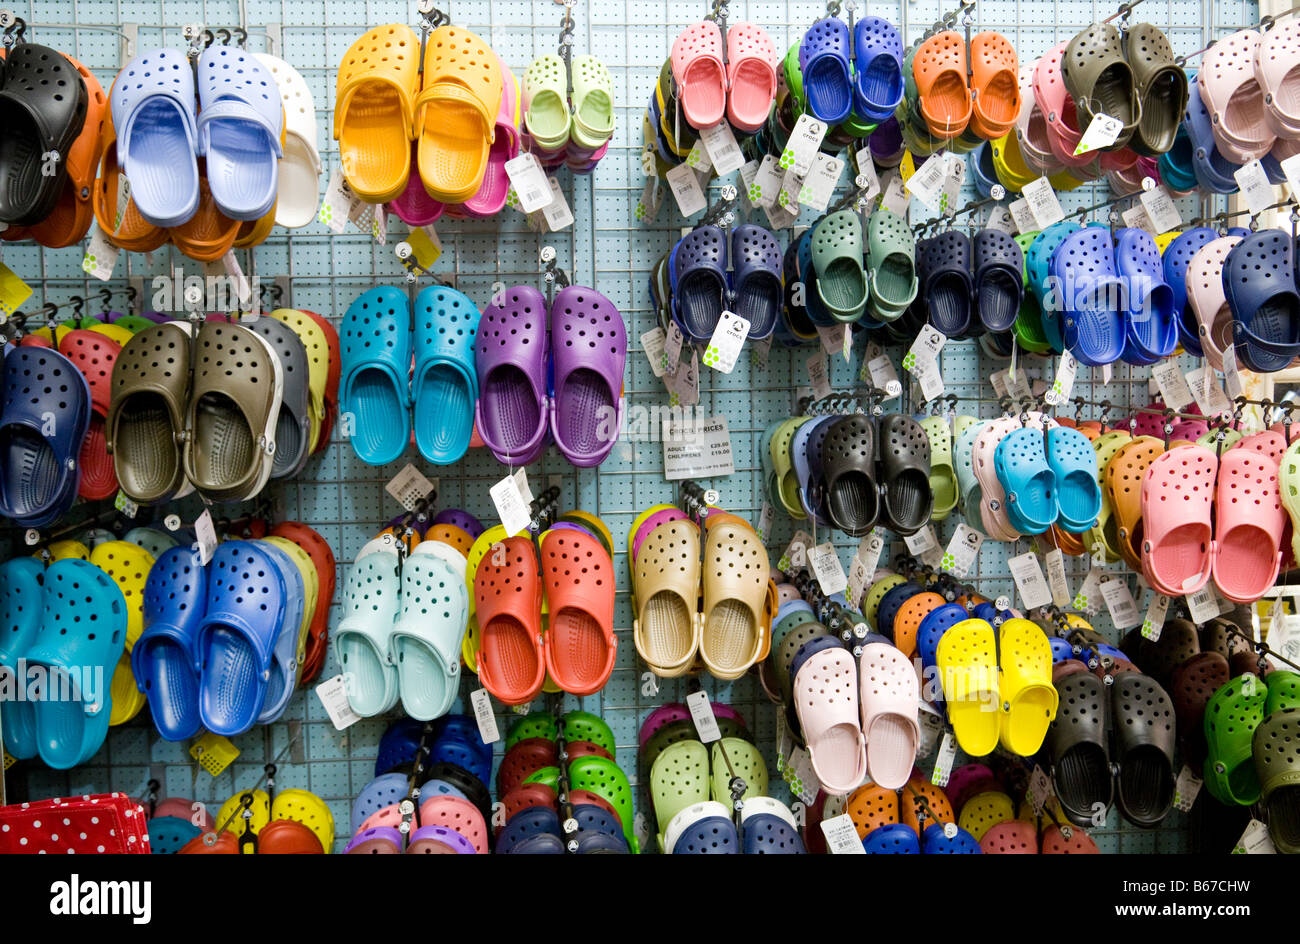 Colourful Crocs shoes for sale, Aldeburgh, Suffolk, England Stock Photo